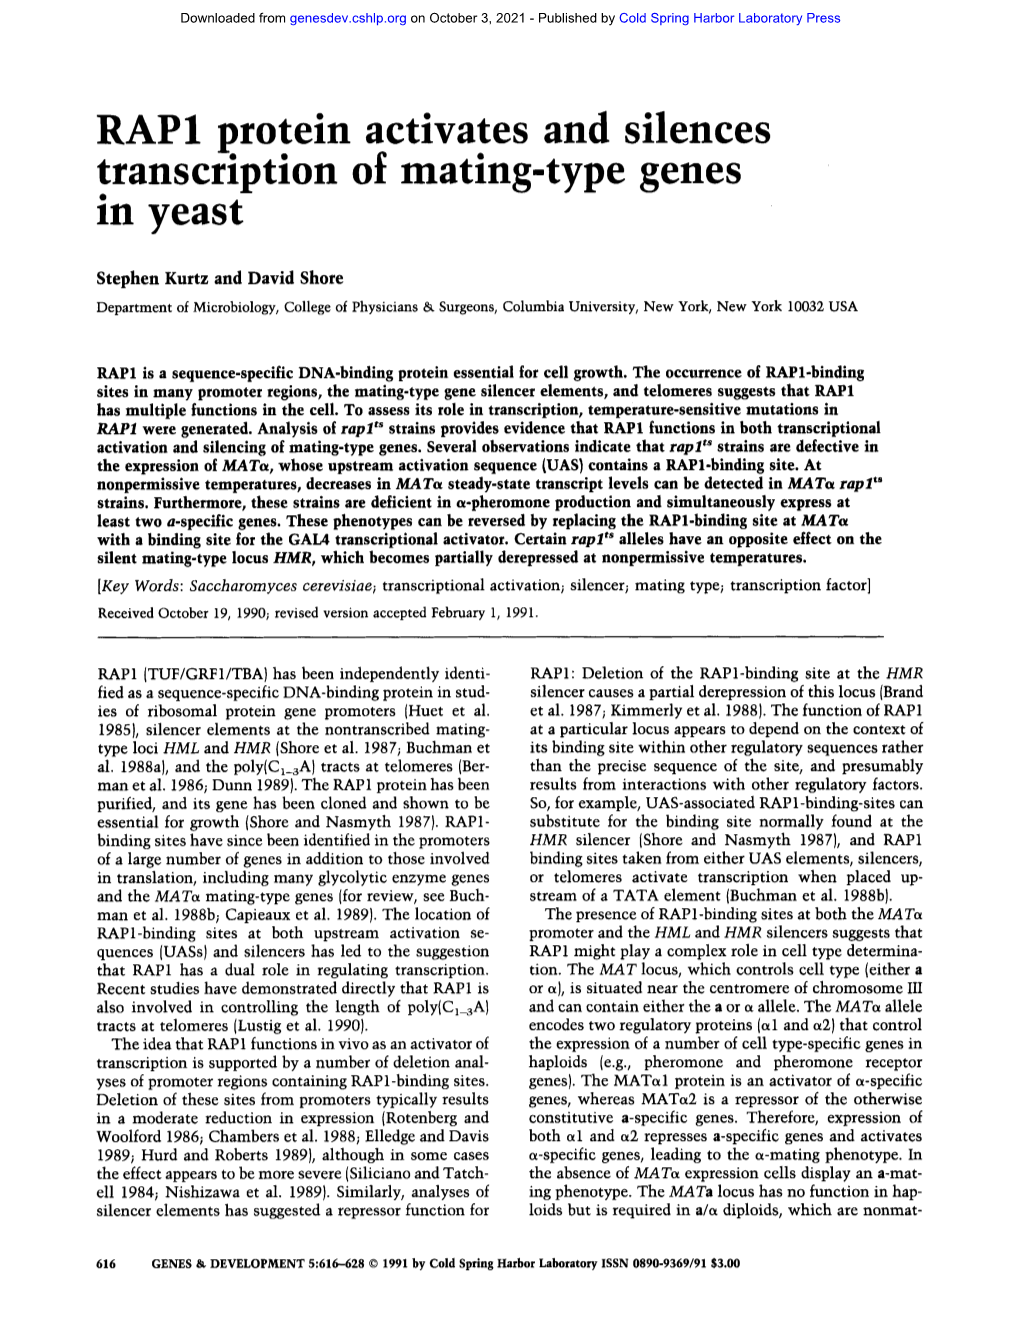 RAP1 Protein Activates and Silences Transcription of Mating-Type Genes M Yeast